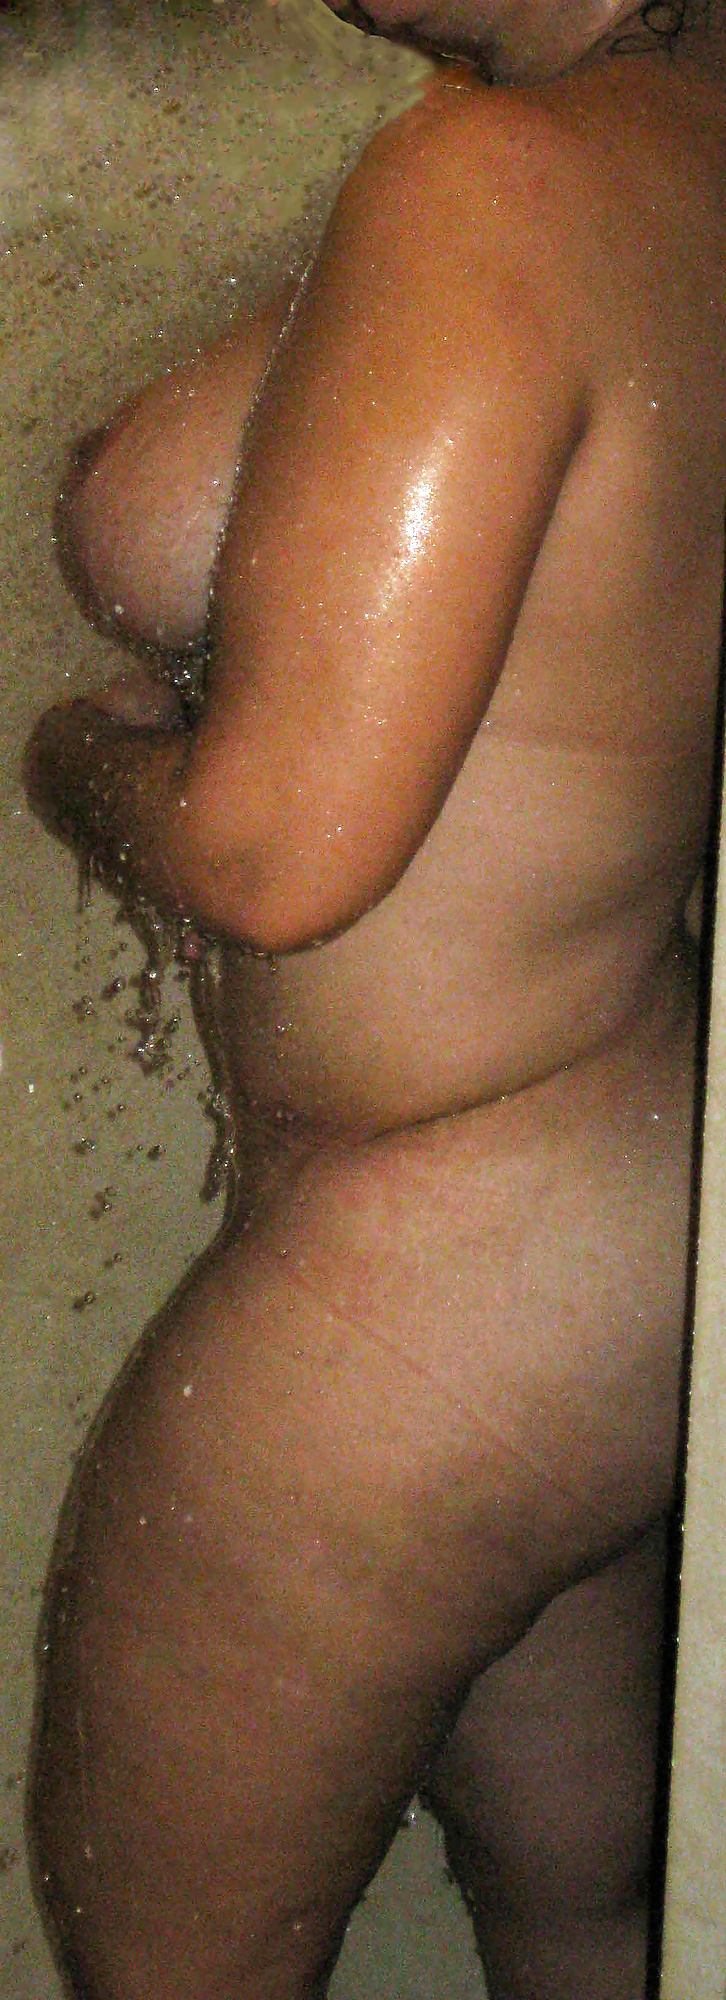 Hot Wife In The Shower #34933225